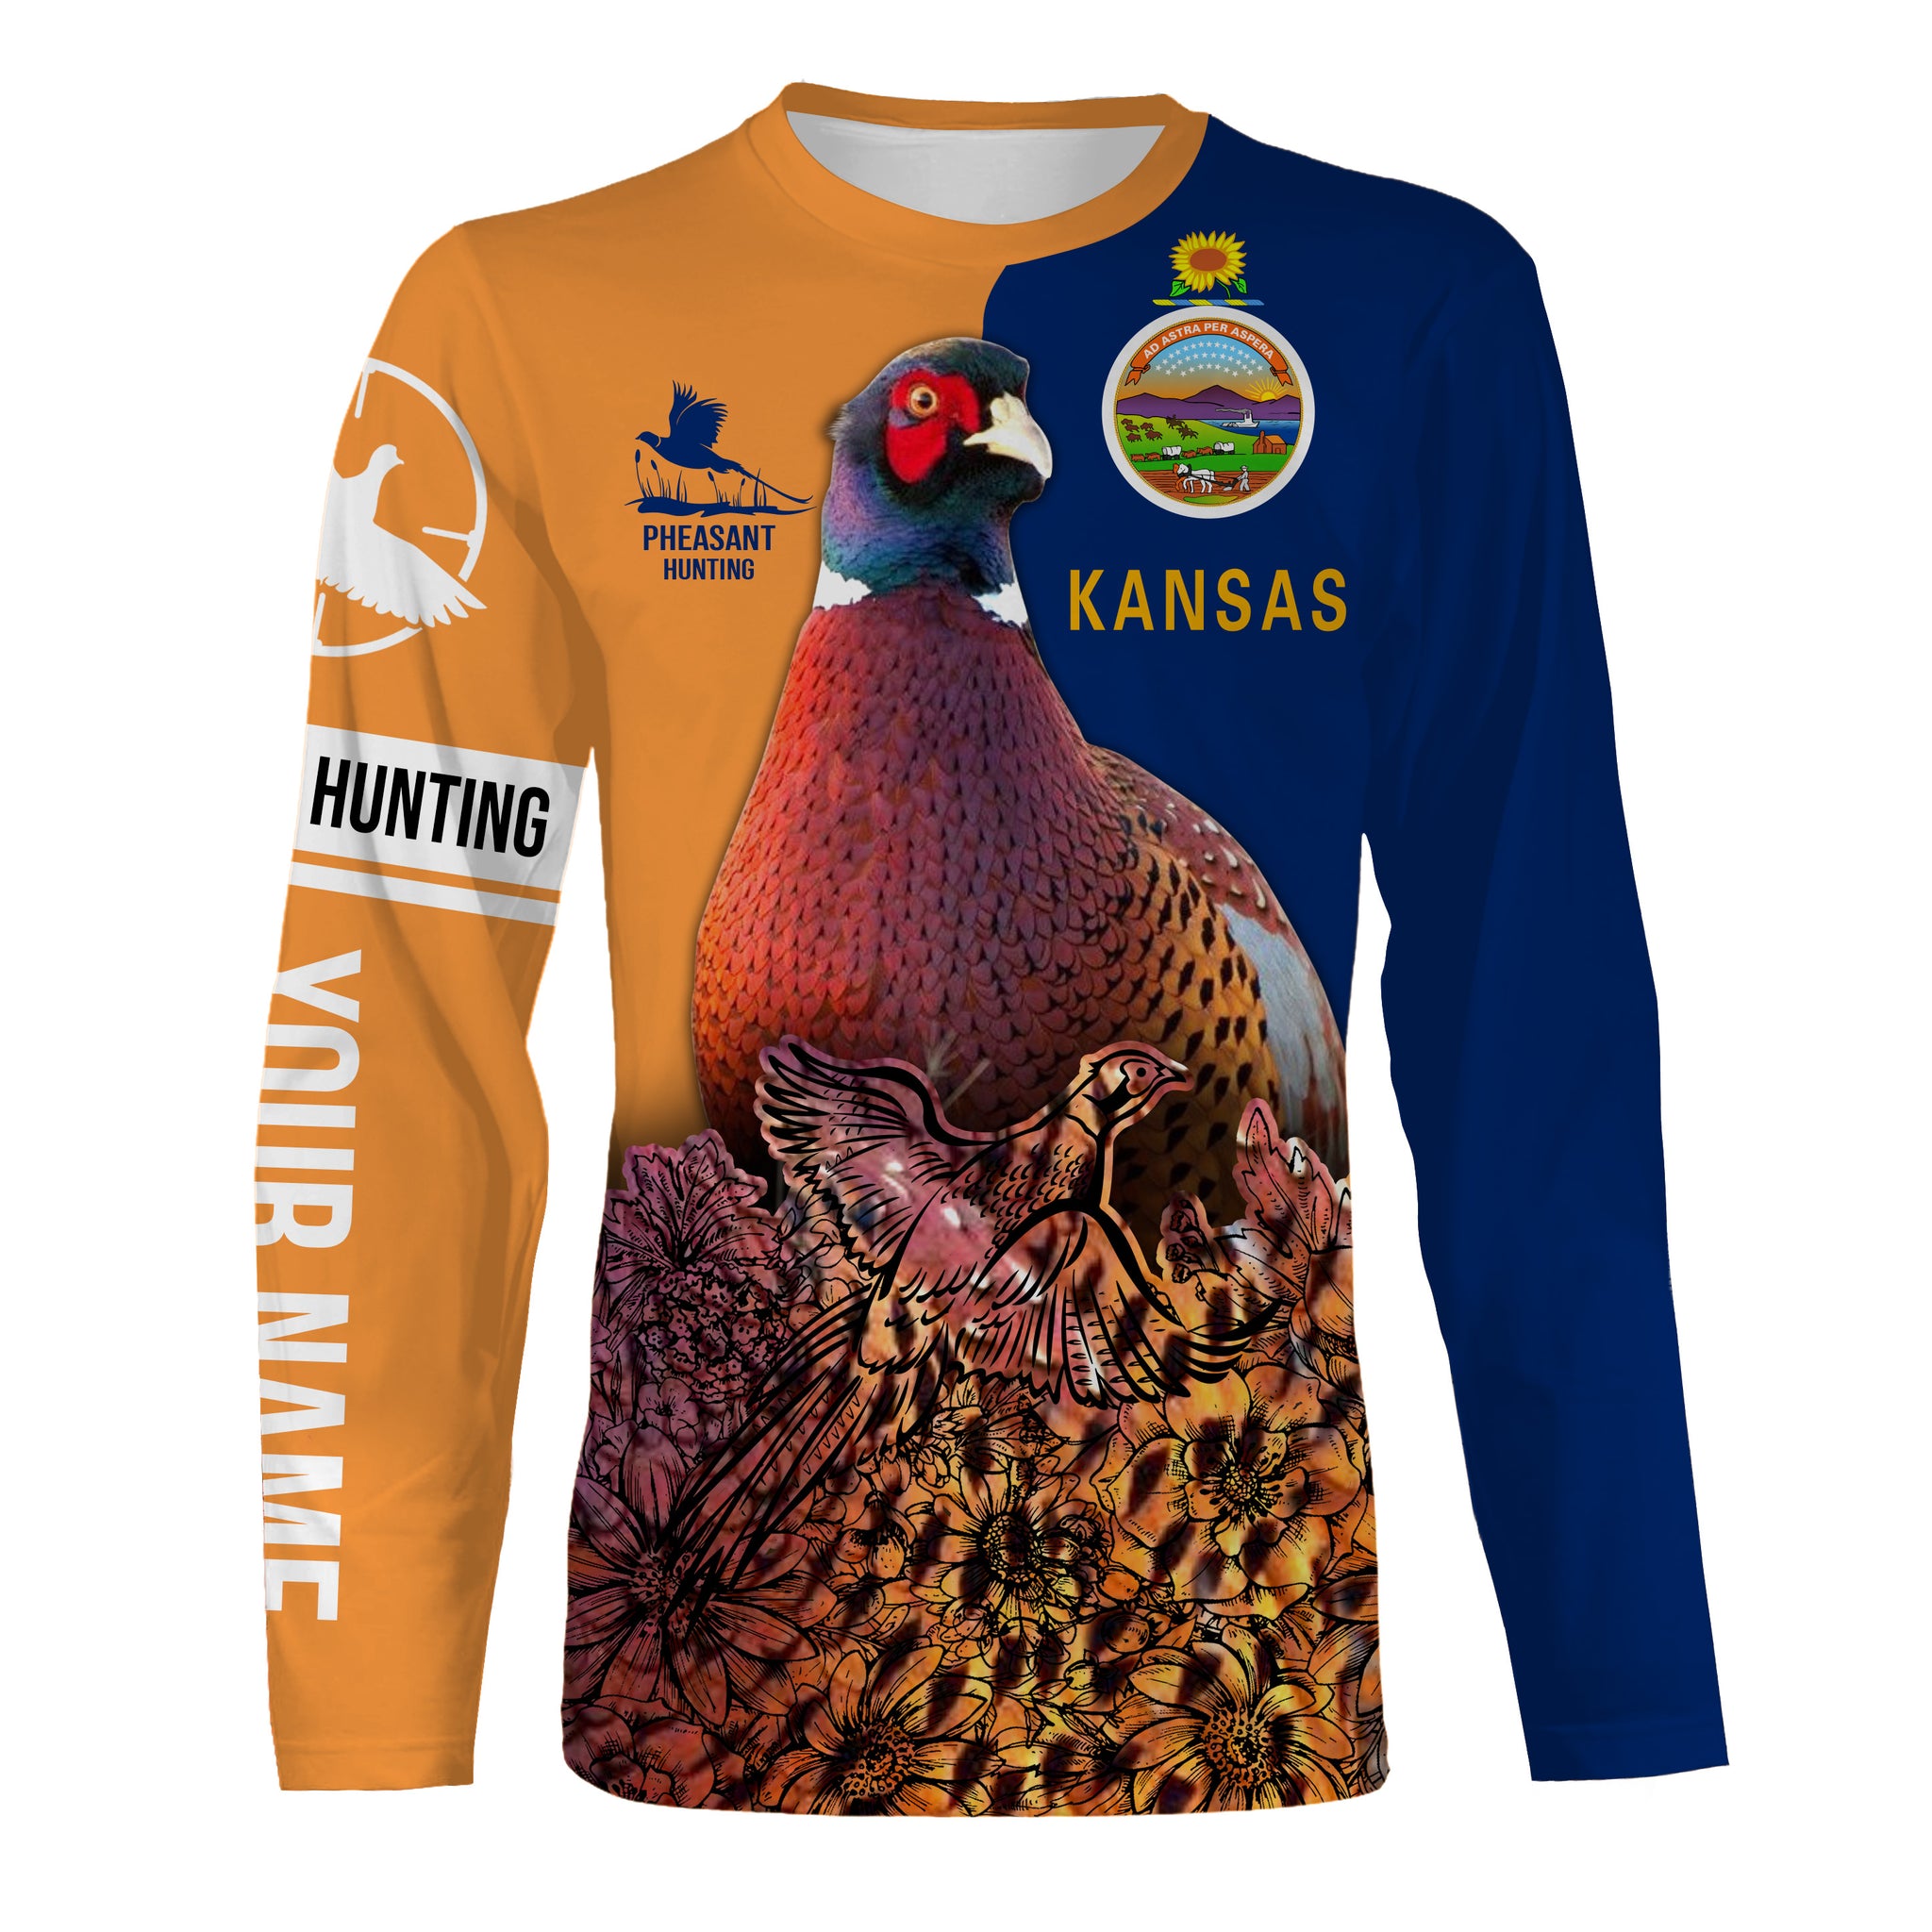 Kansas pheasant hunting clothes upland hunting 3D All Over Printed Shirts - Personalized Hunting gift for men, women, kid - NQS2635